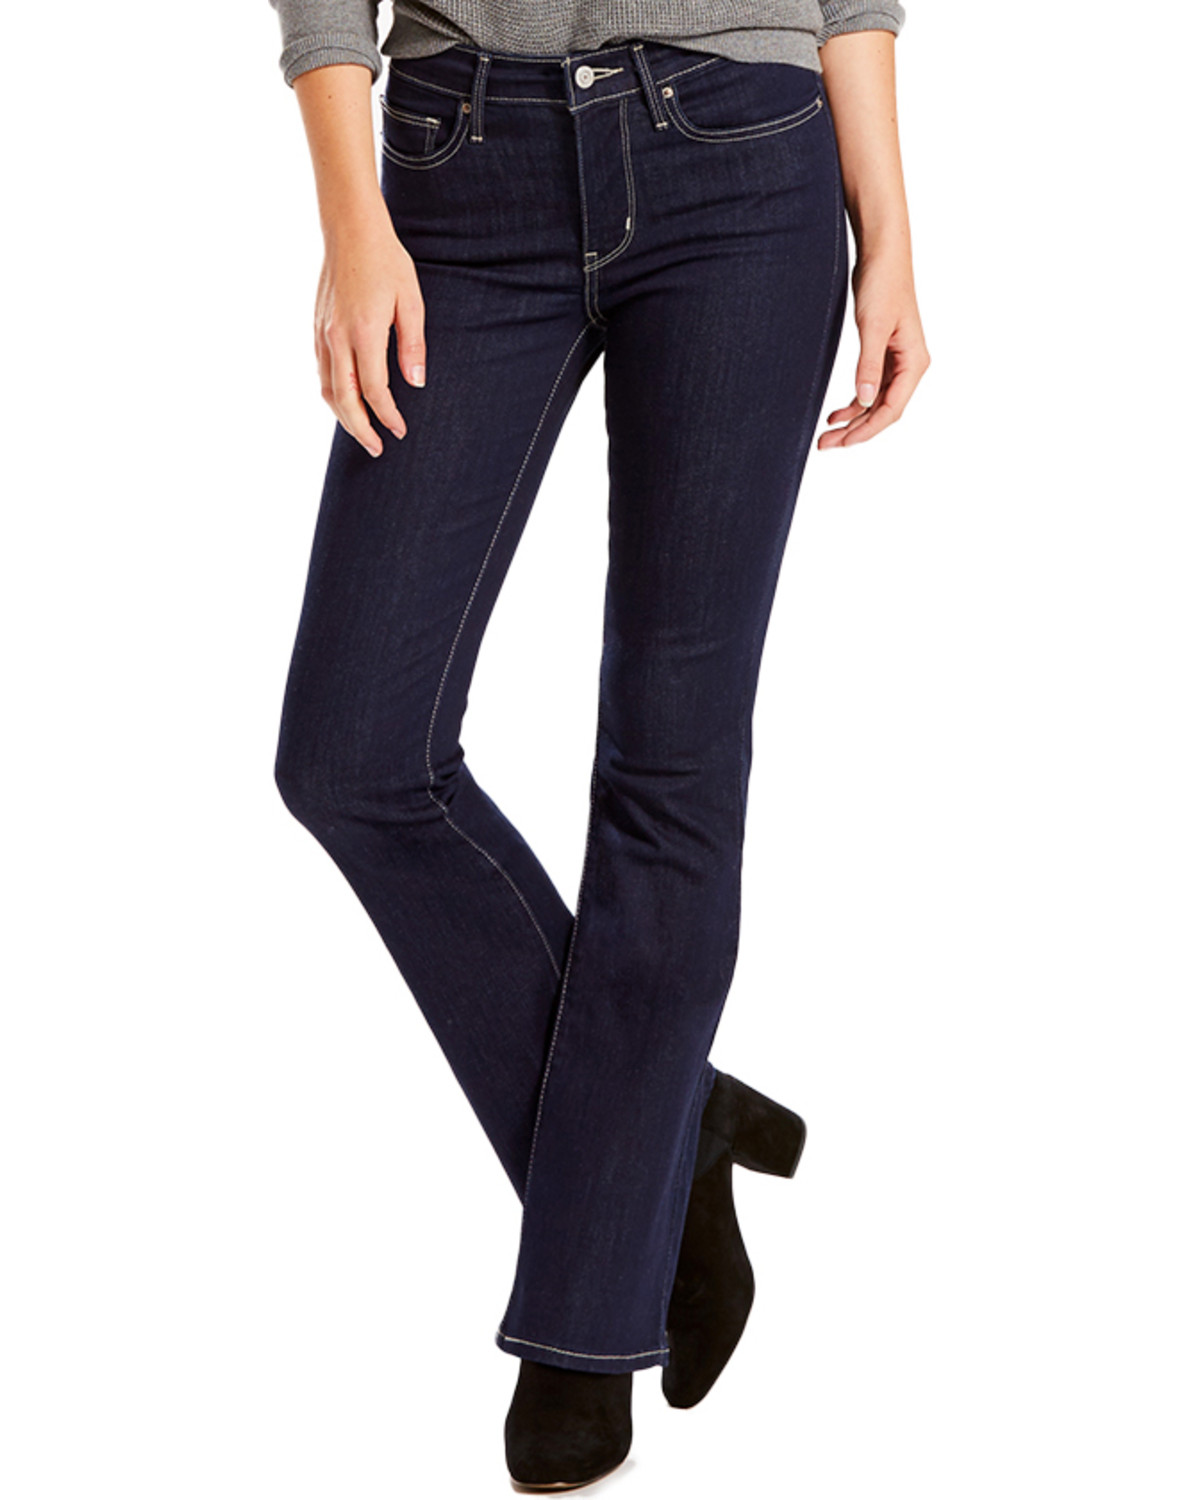 Levi's Women's Slimming Boot Cut Jeans | Boot Barn